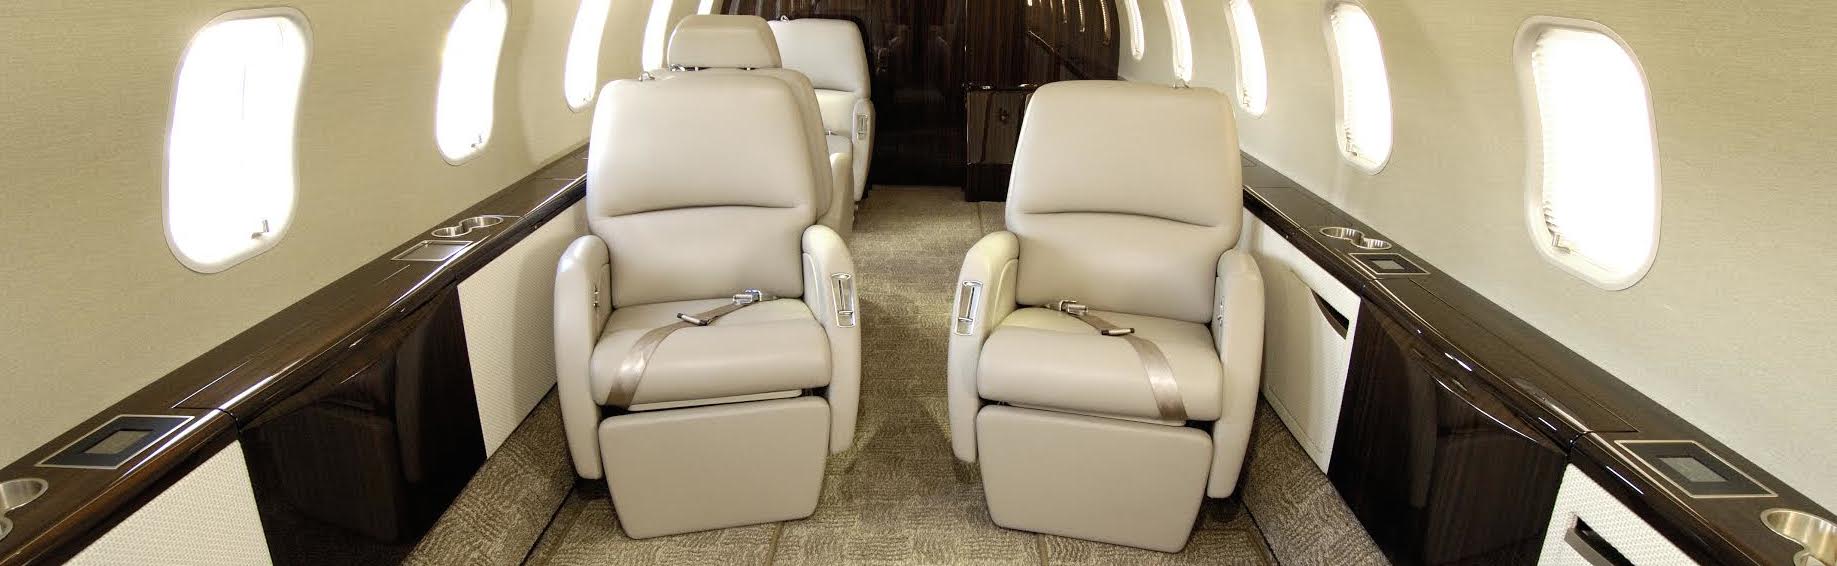 Private Jet Charter | The benefits of flying private and empty legs